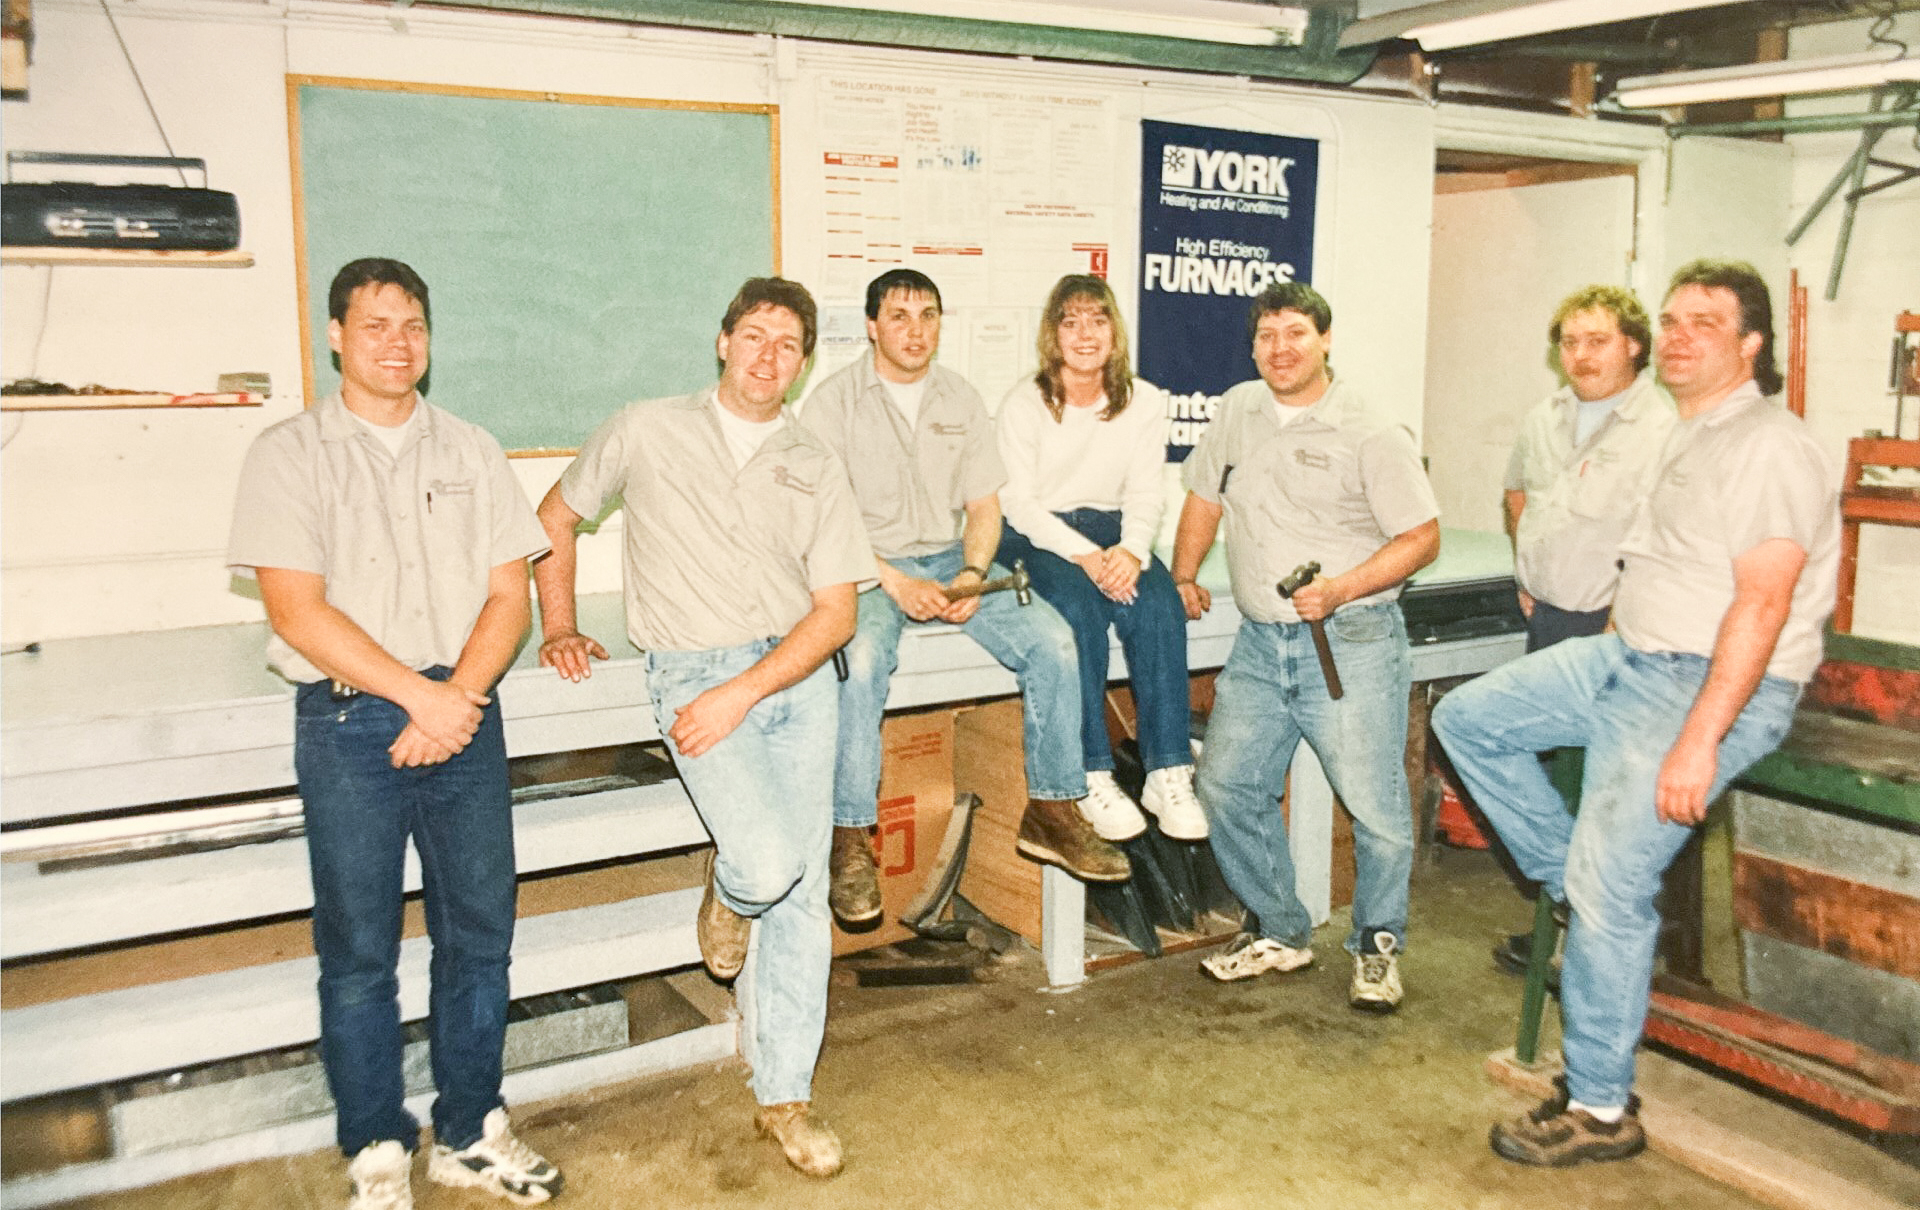 4Front Employees congregated wearing uniforms, circa 1980s